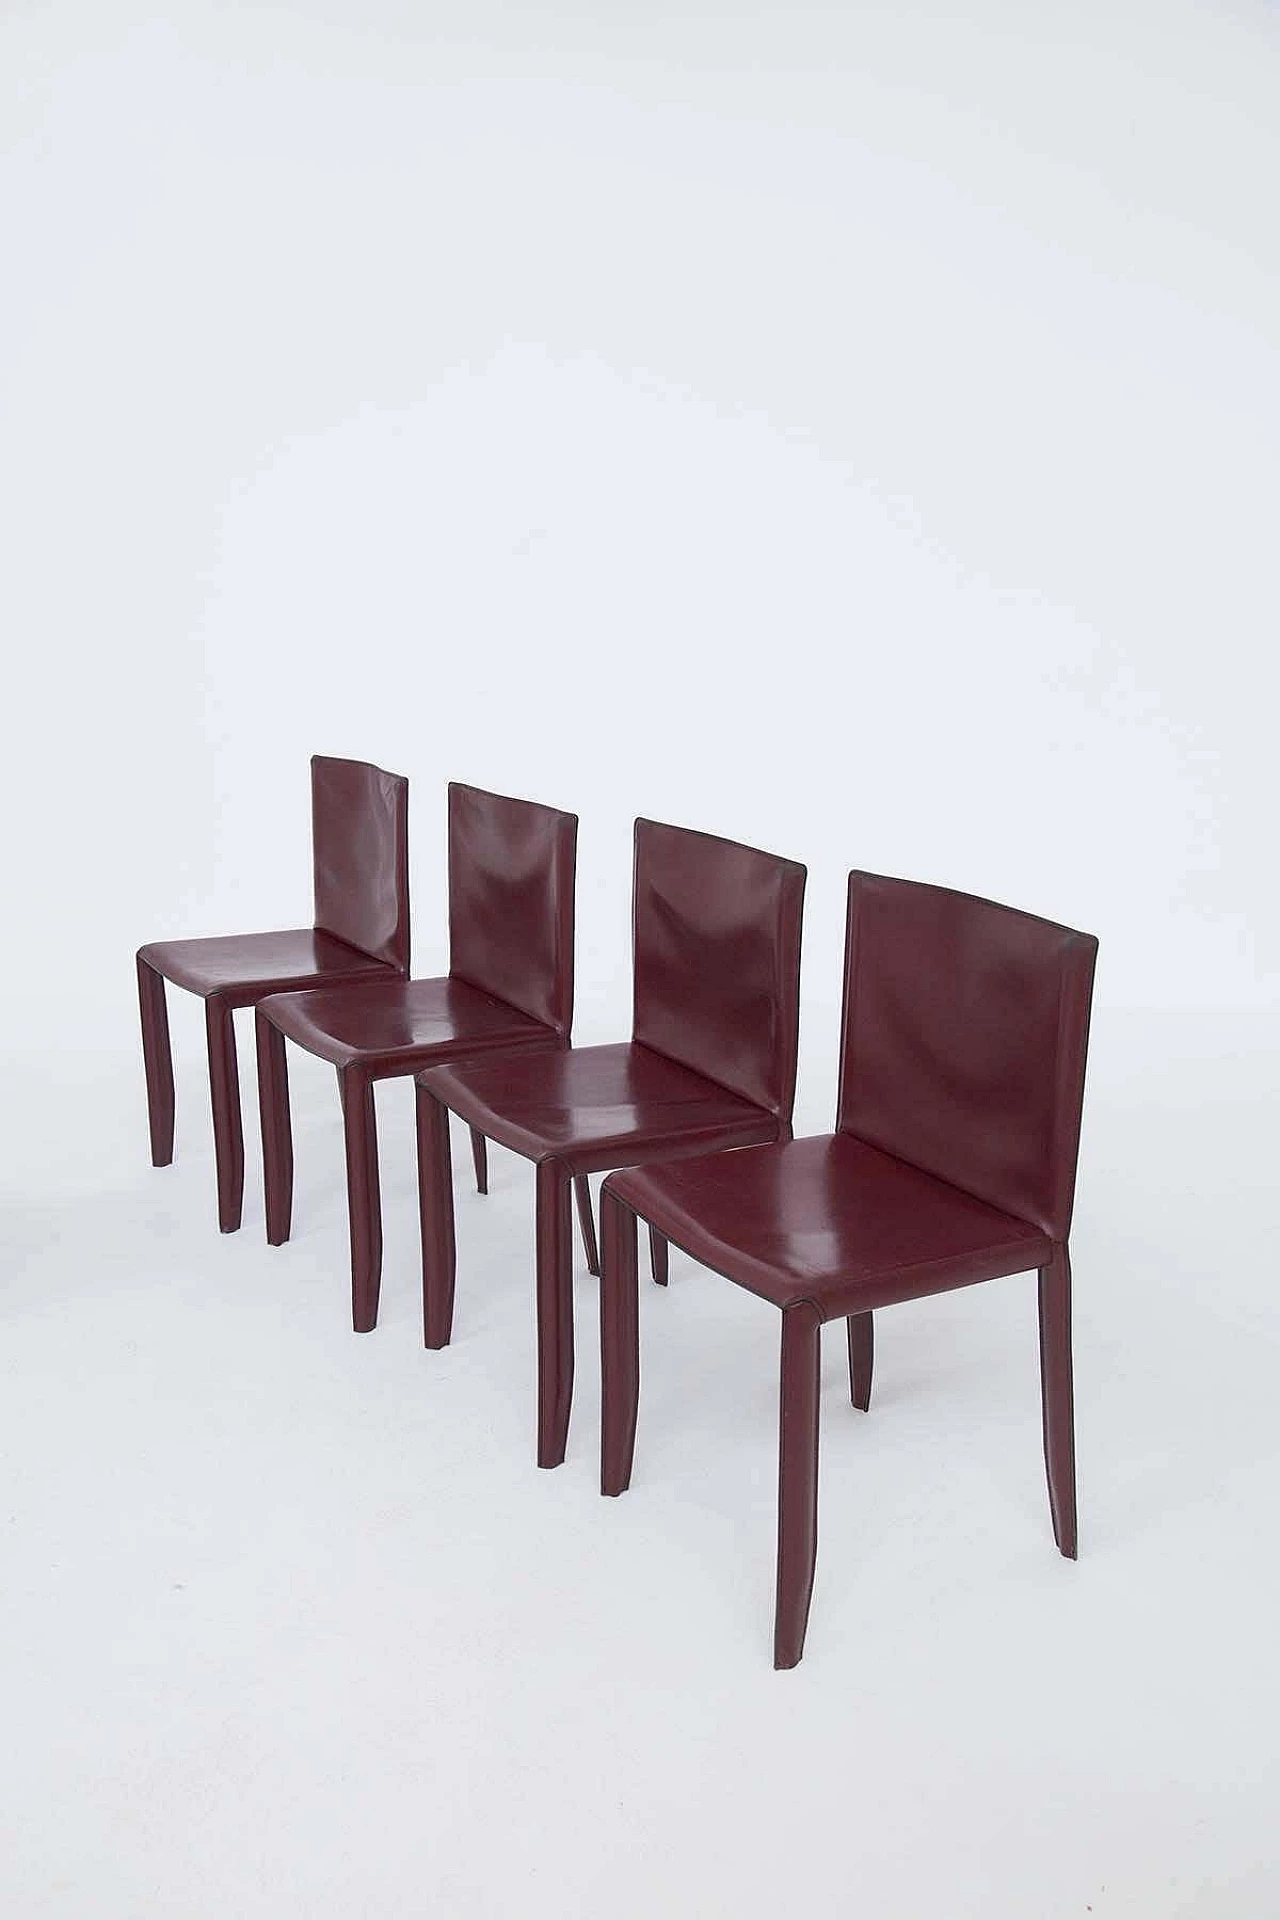 6 burgundy leather table chairs with visible stitching for Cattelan Italia, 1980s 1380229